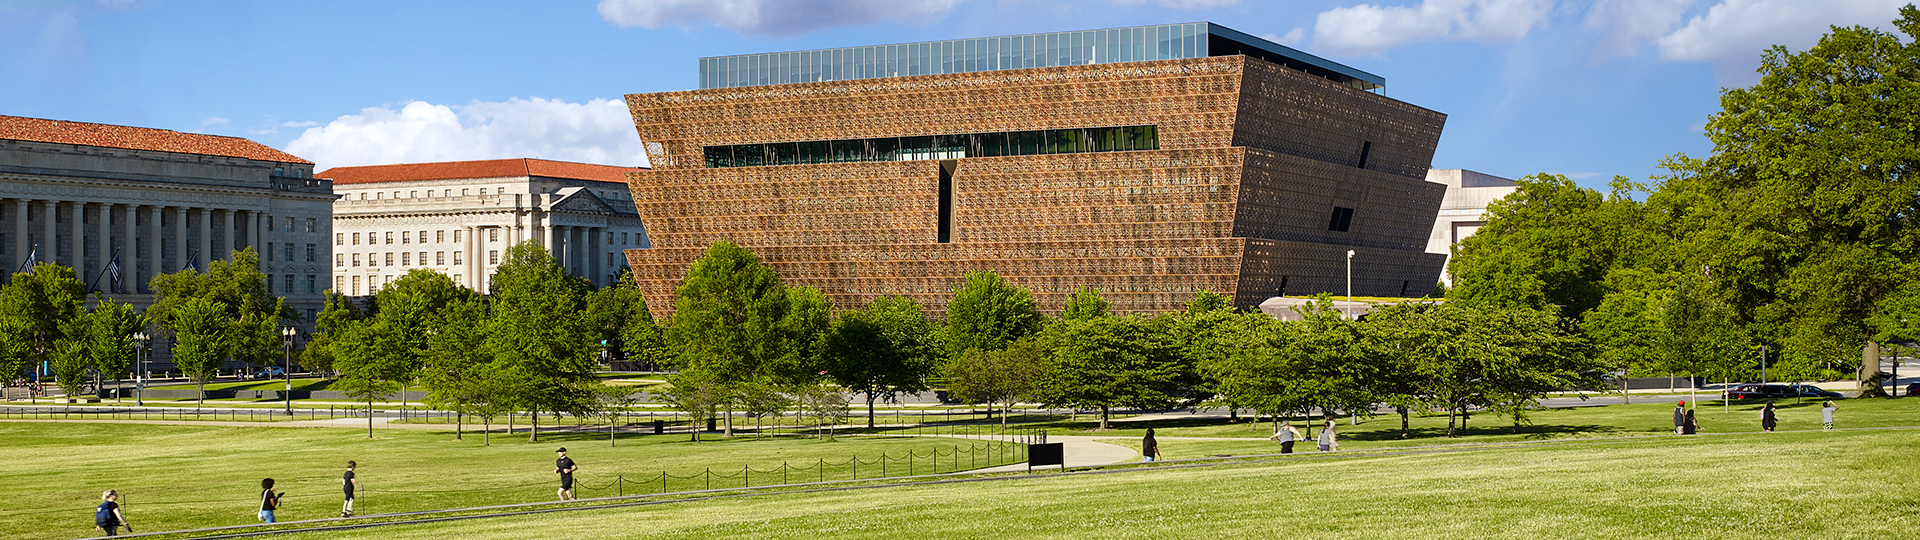 National Museum of African American History and Culture on the National Mall with Washington Monument